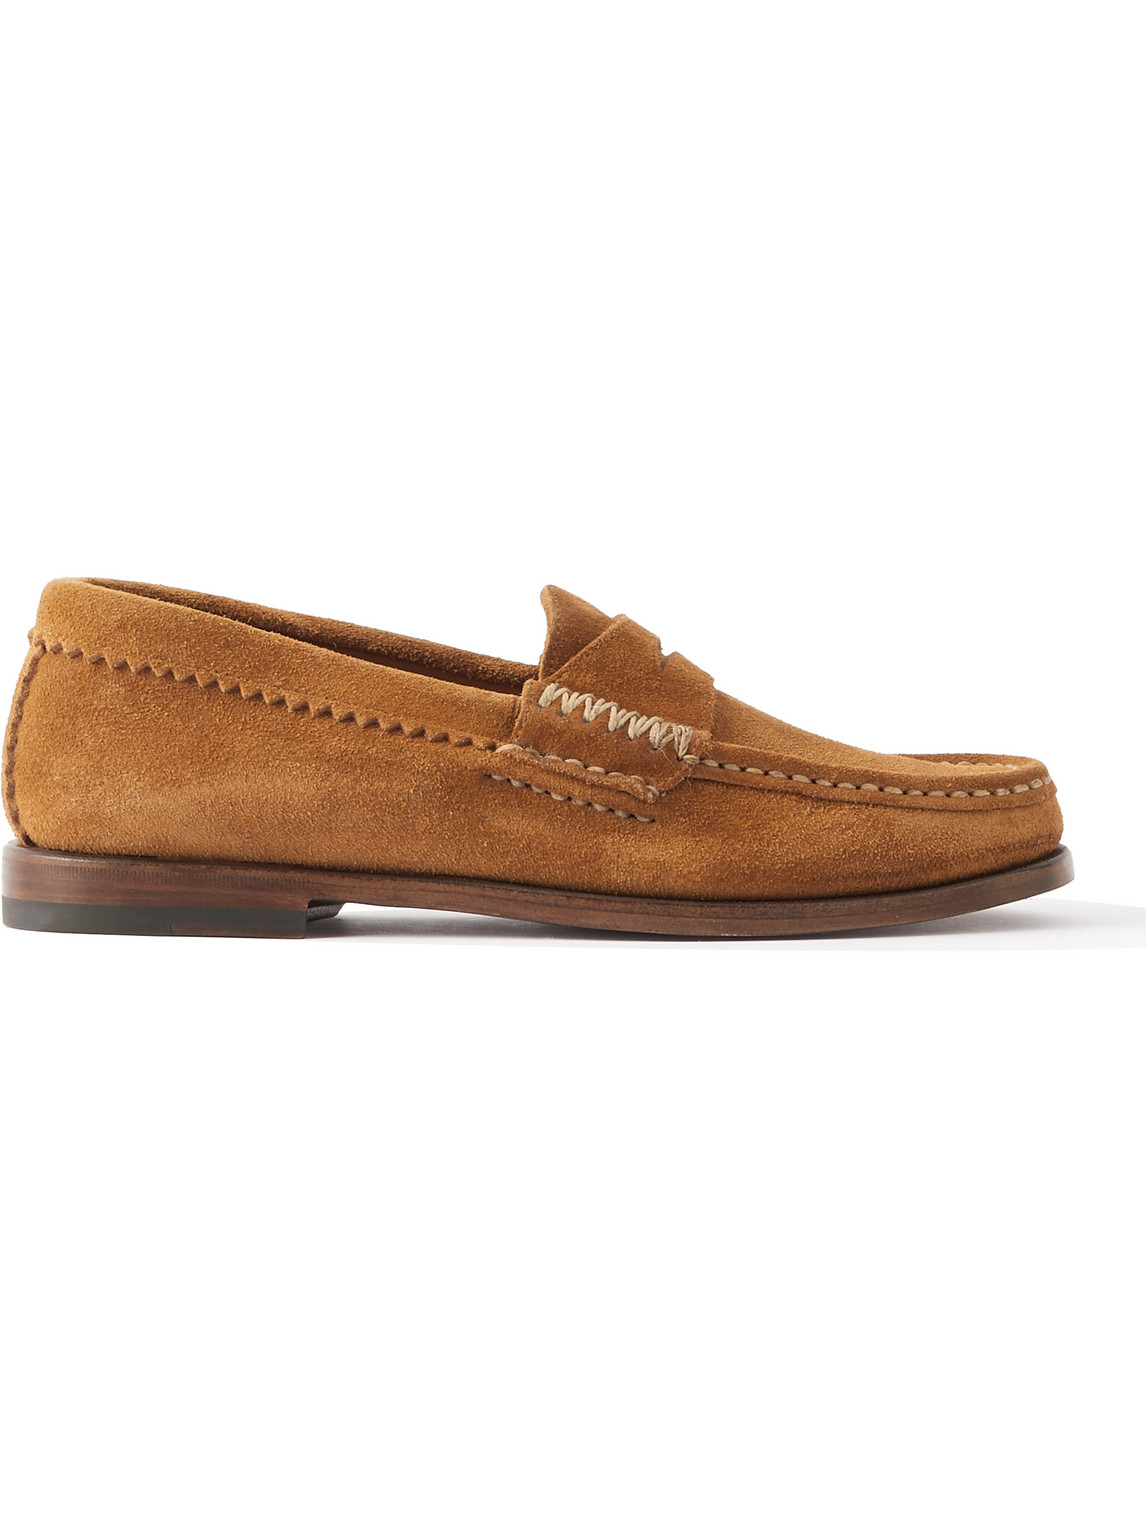 Rob's Tosca Leather Penny Loafers